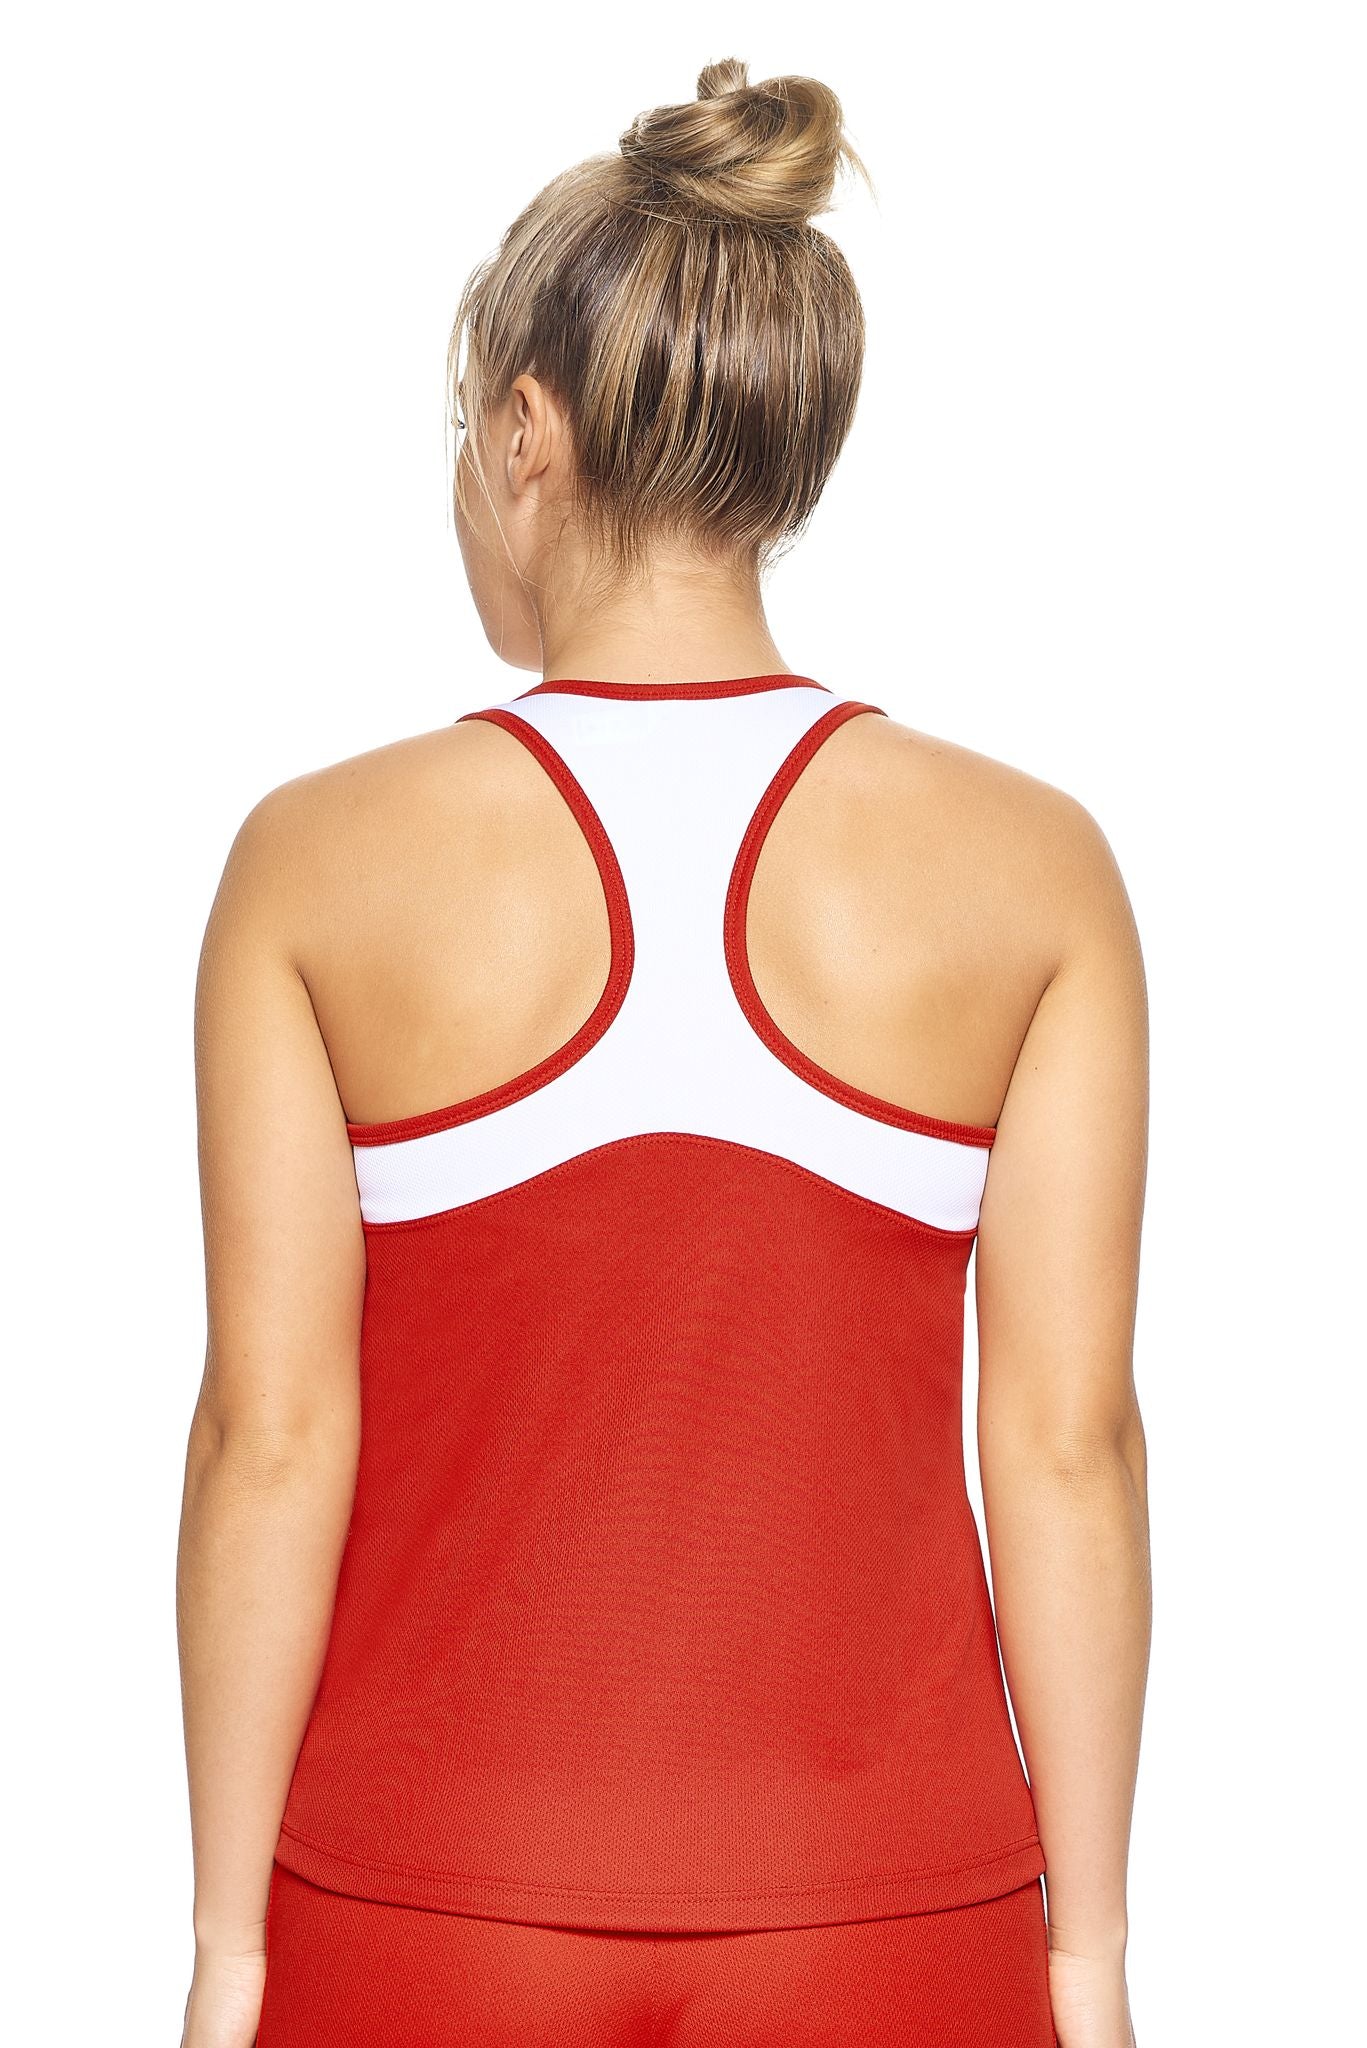 Oxymesh™ Distance Racerback Tank 🇺🇸 - Expert Brand Apparel#color_red-white